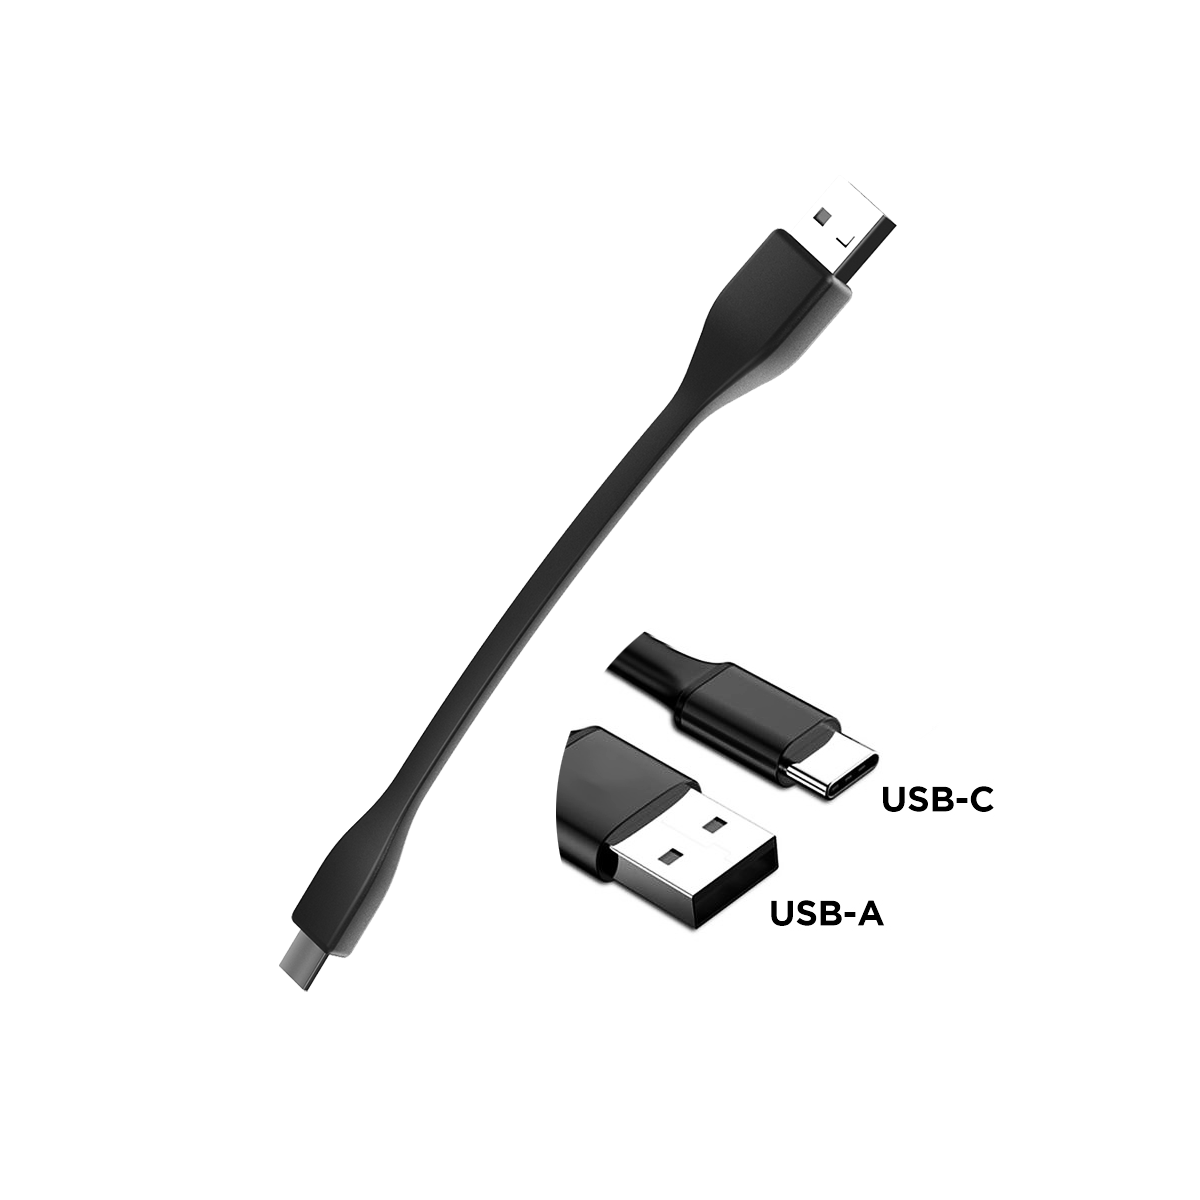 Flexible USB-C to USB-A Cable Stand